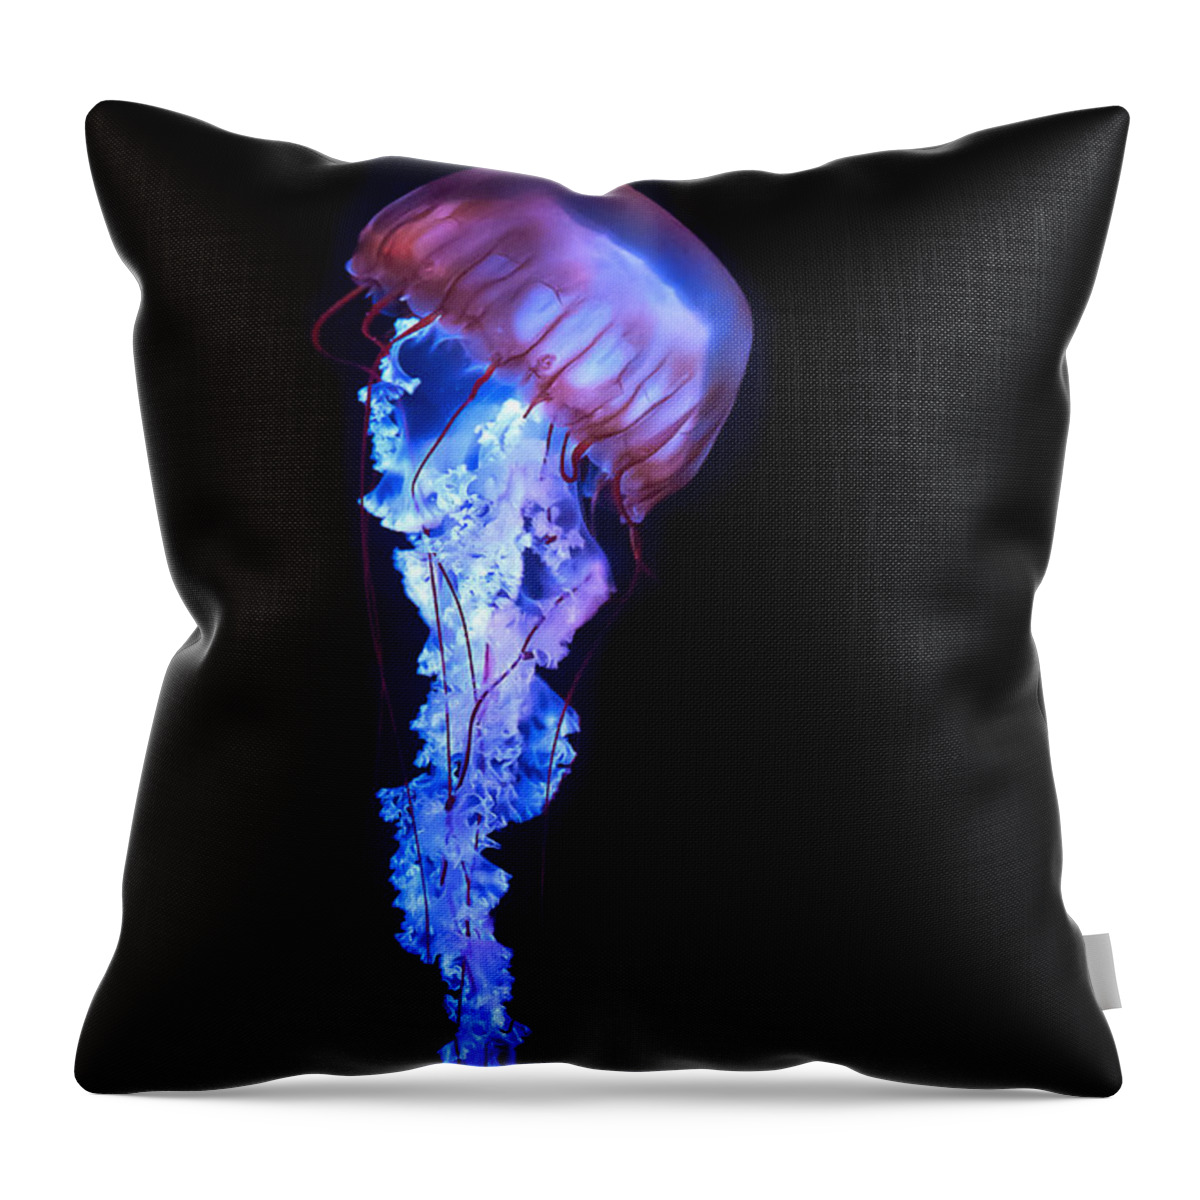 Underwater Throw Pillow featuring the photograph Blue And Purple Jellyfish by Maria Aiello